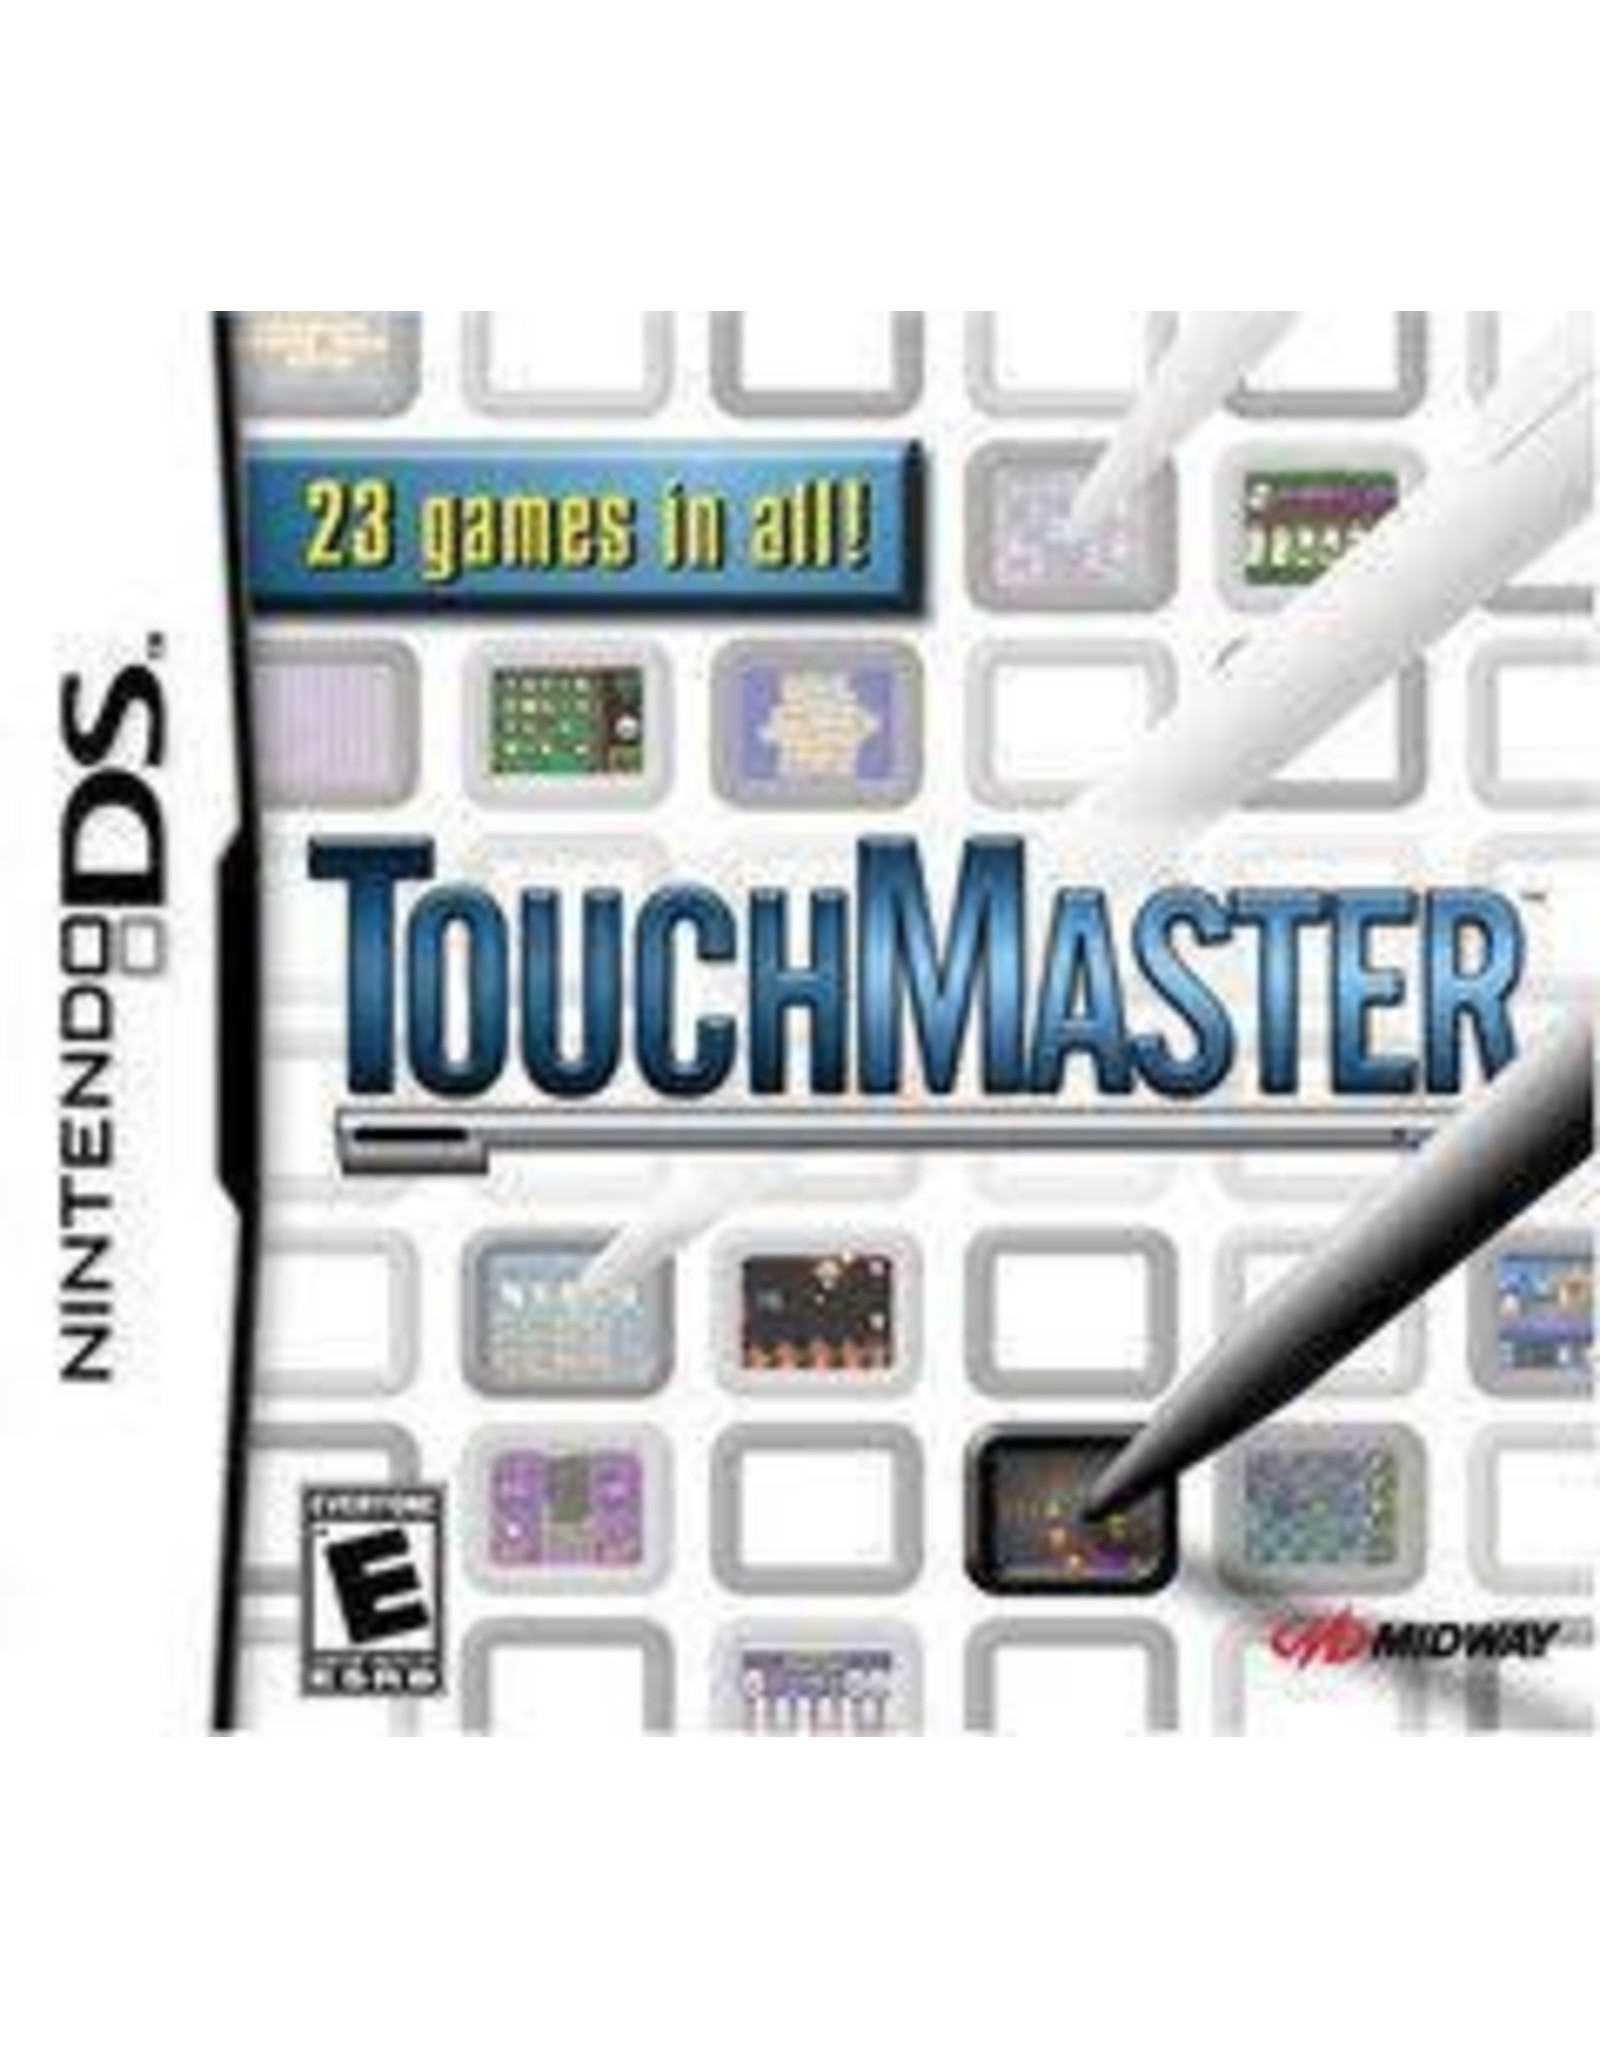 Nintendo DS Touchmaster (No Manual)